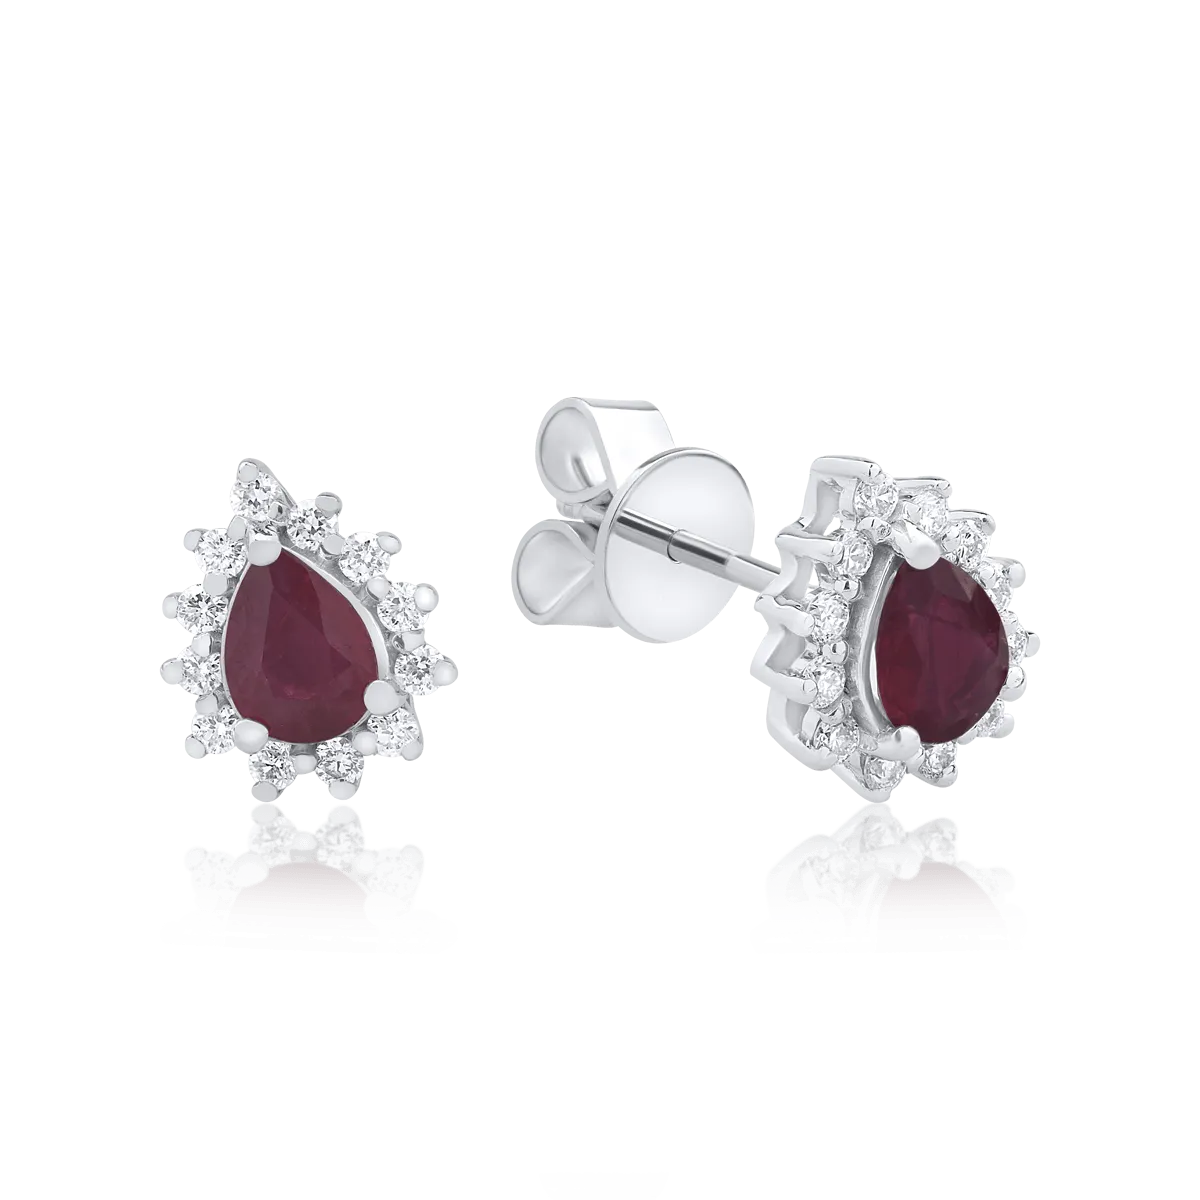 18K white gold earrings with rubies of 0.512ct and diamonds of 0.162ct